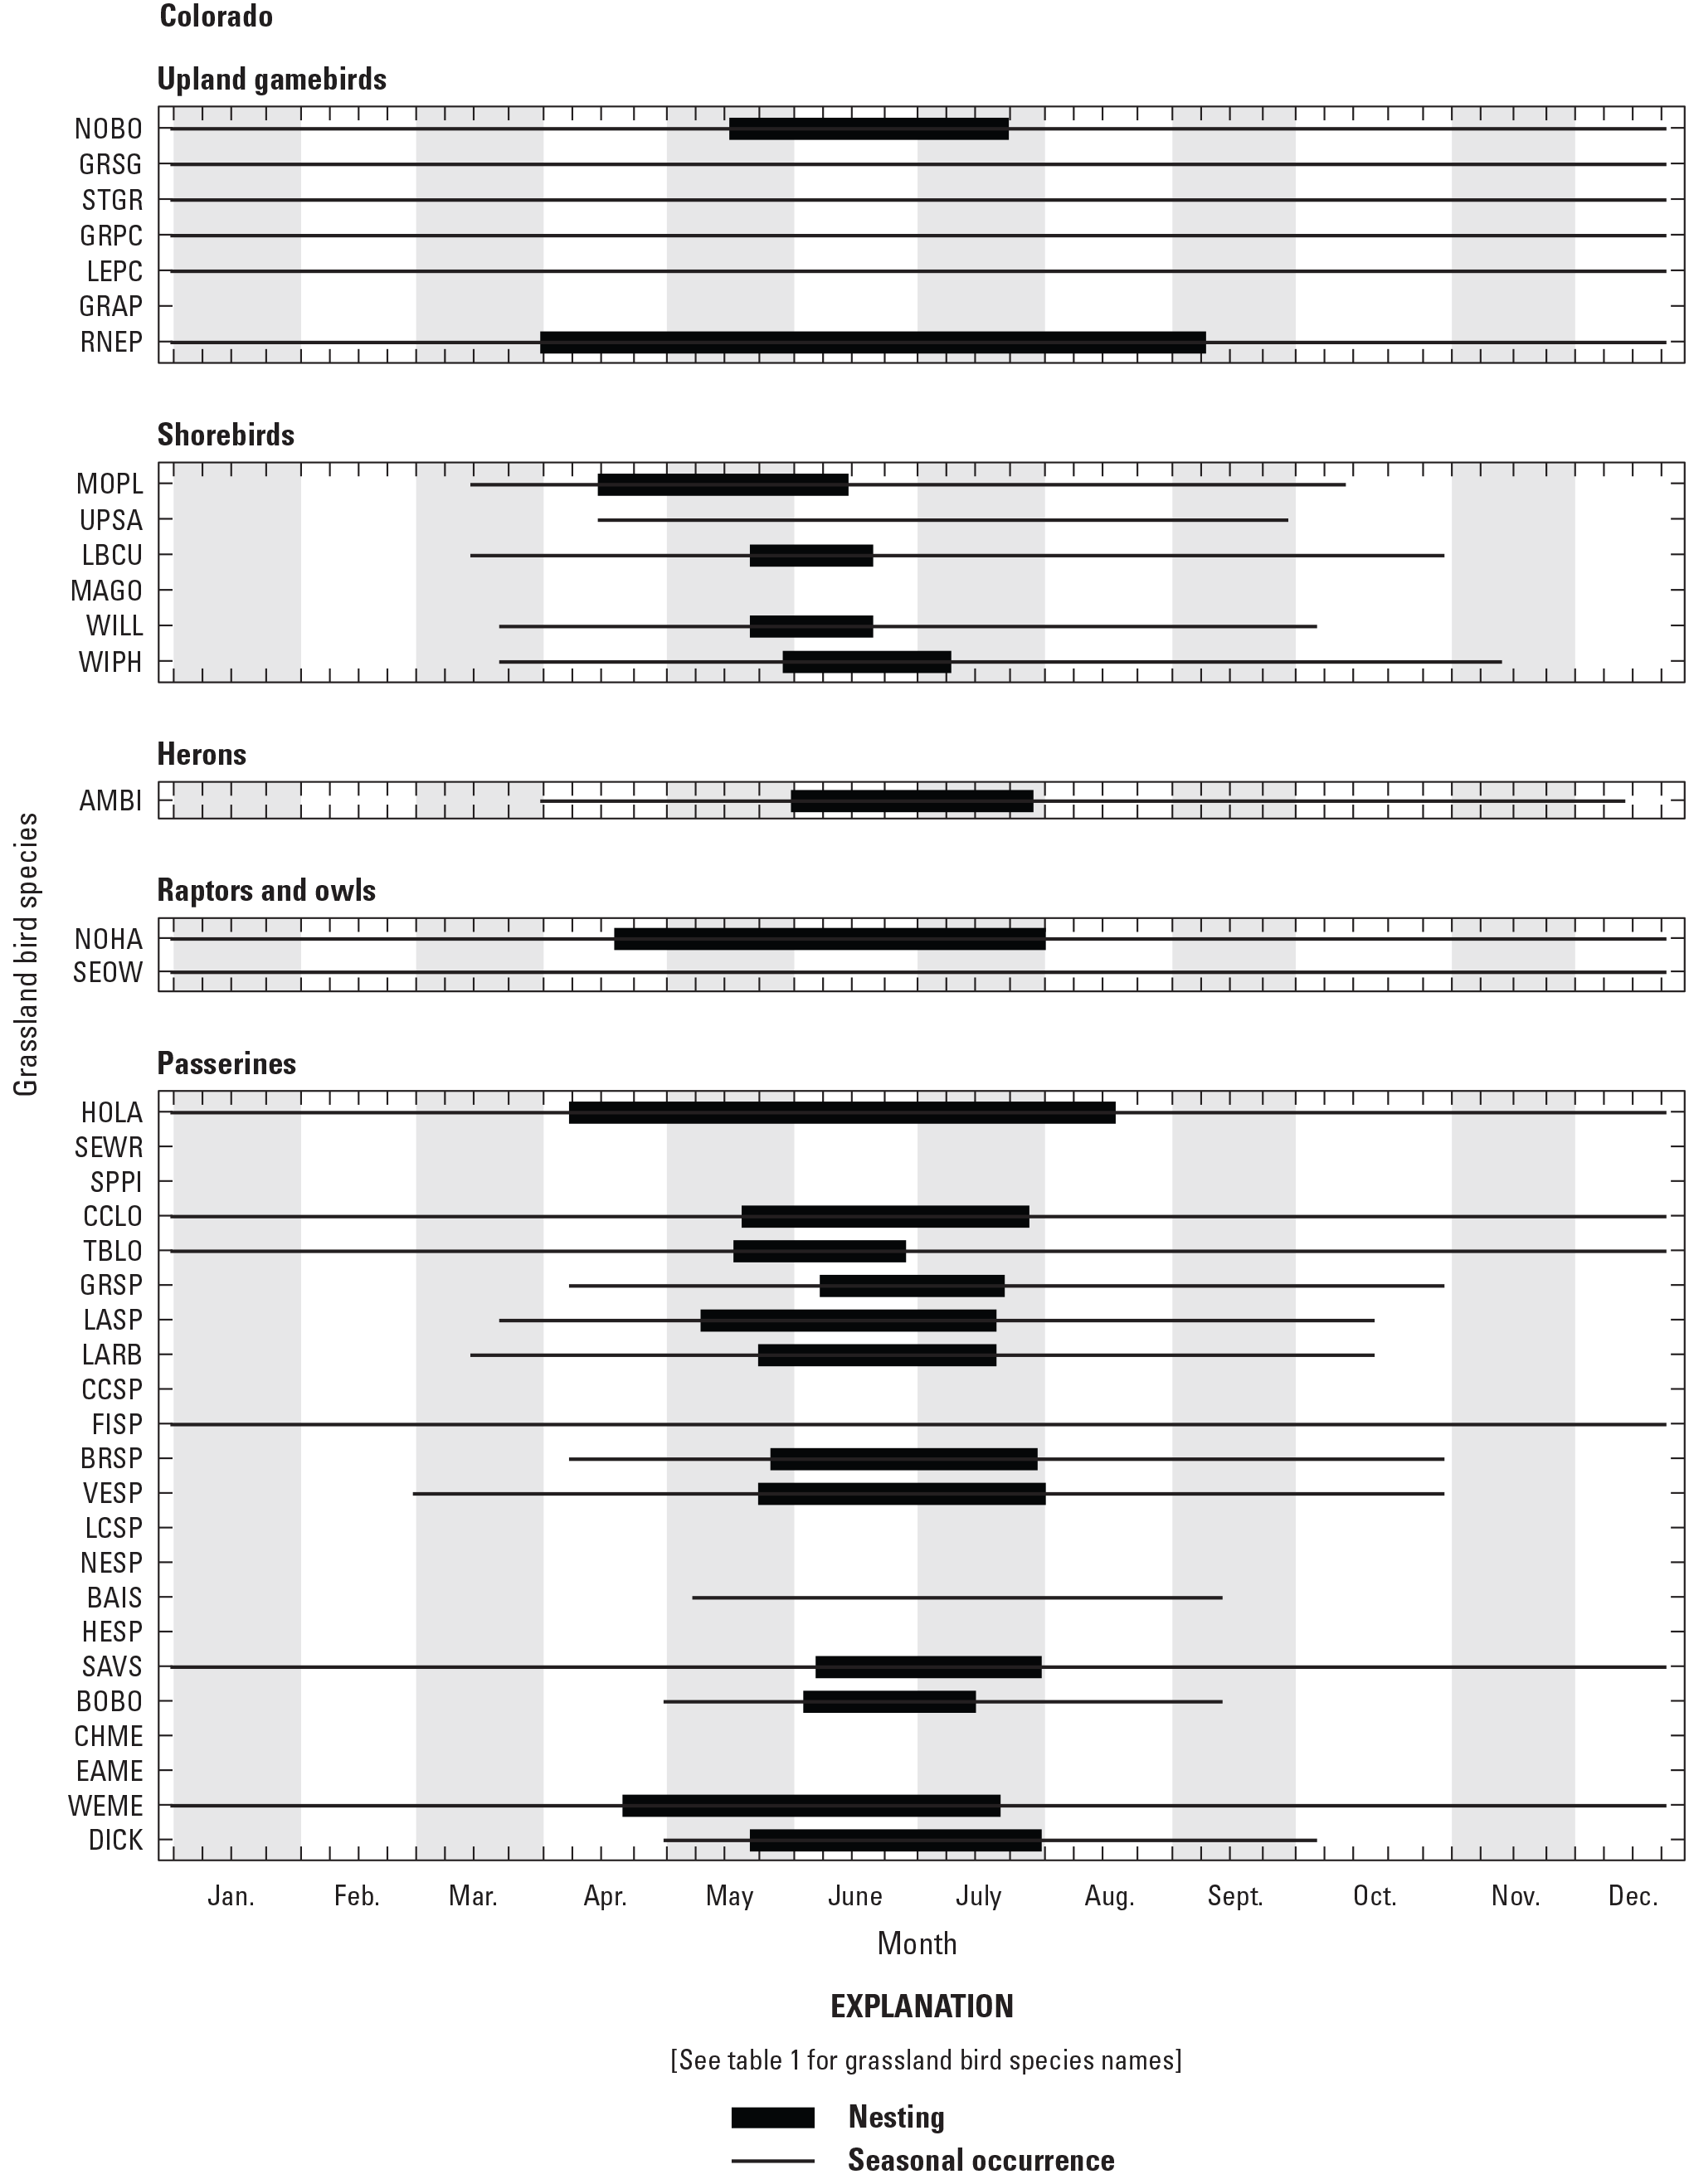 Figure showing seasonal occurrence and nesting phenology for 38 grassland bird species
               in Colorado, United States.